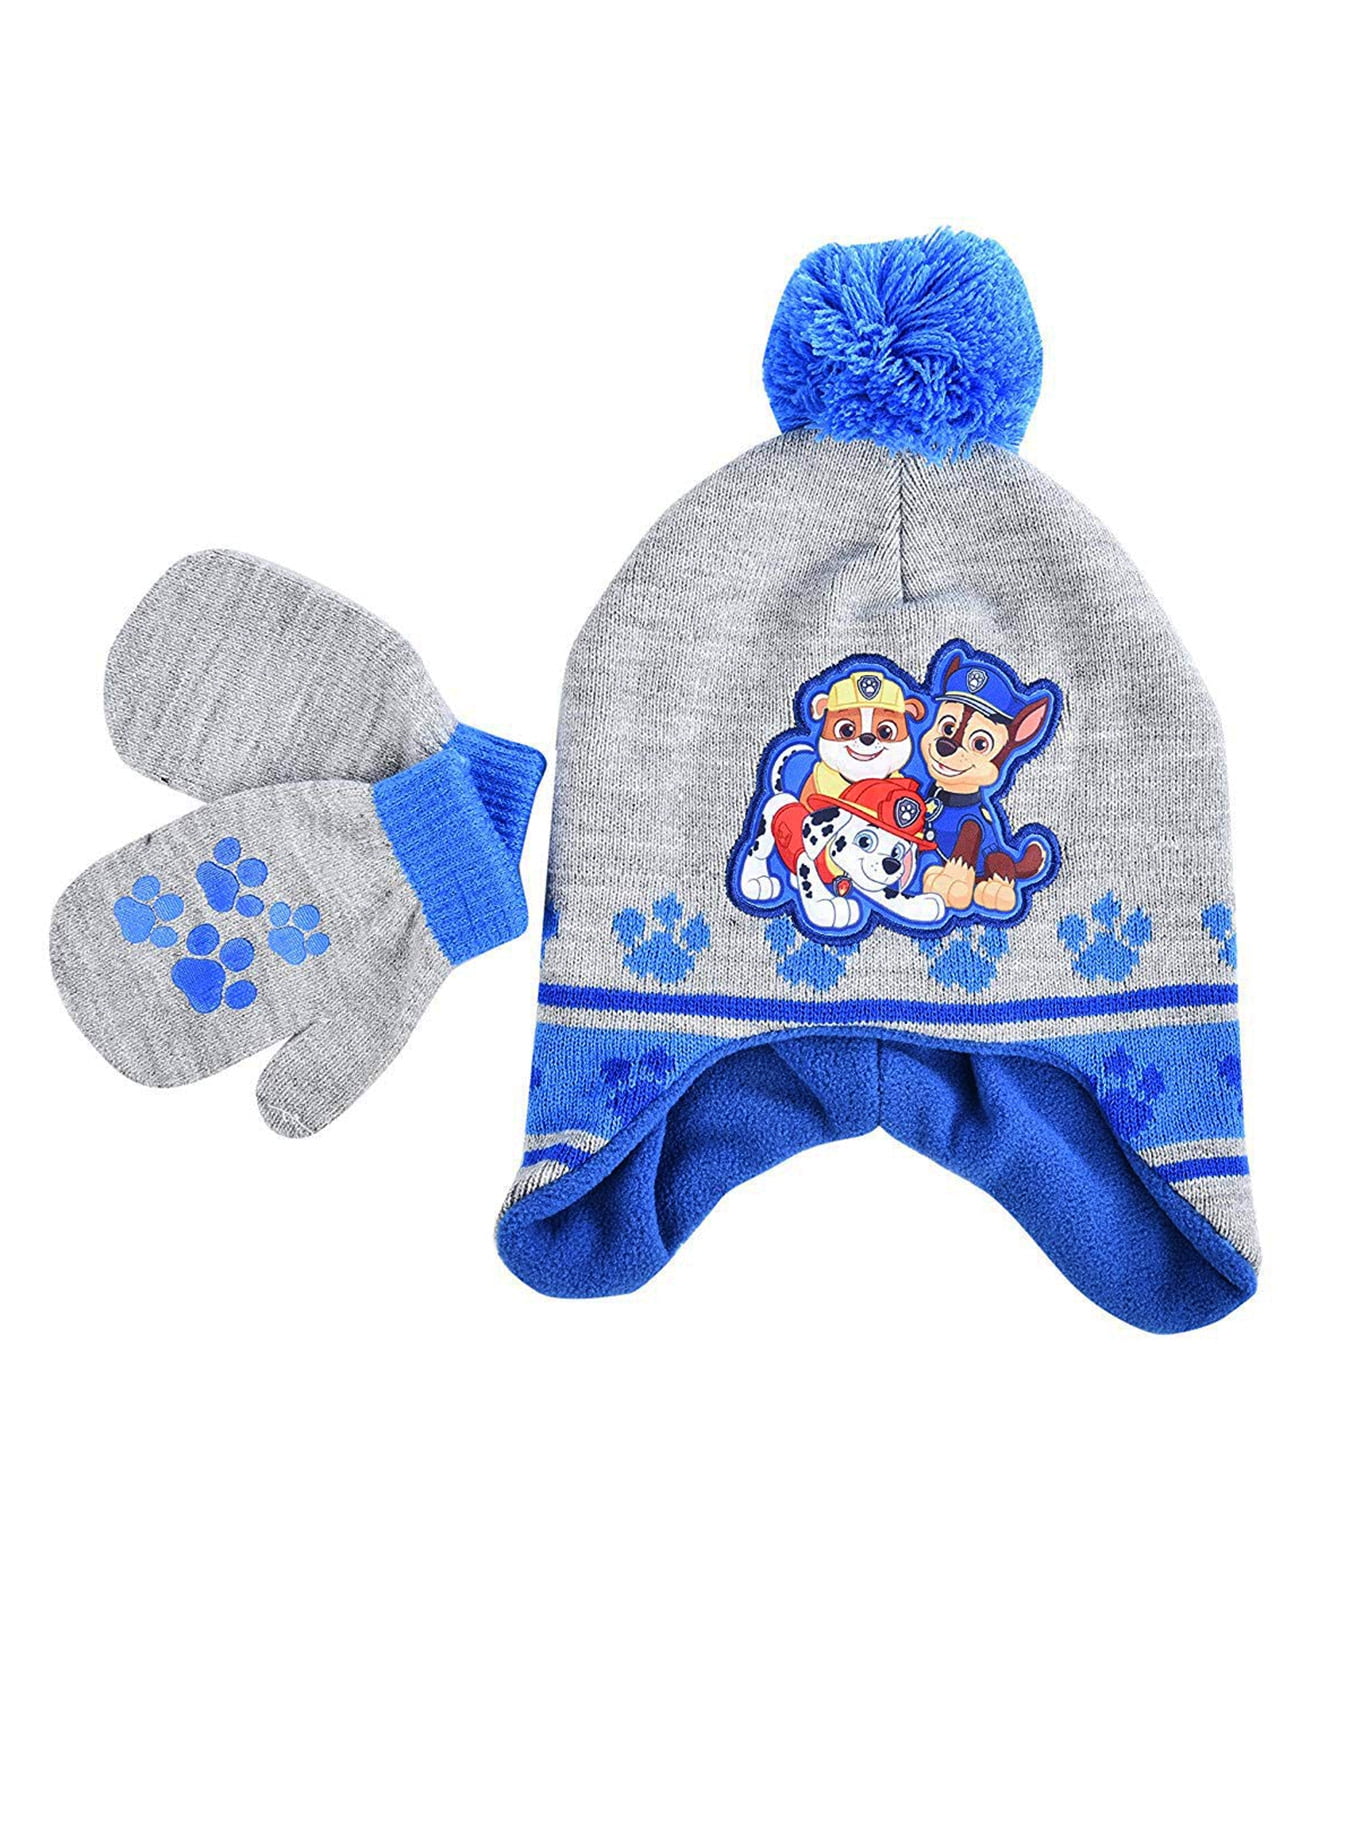 New One Size Fits All Baby King Fleece Hat & Mittens Set Baby Shower 